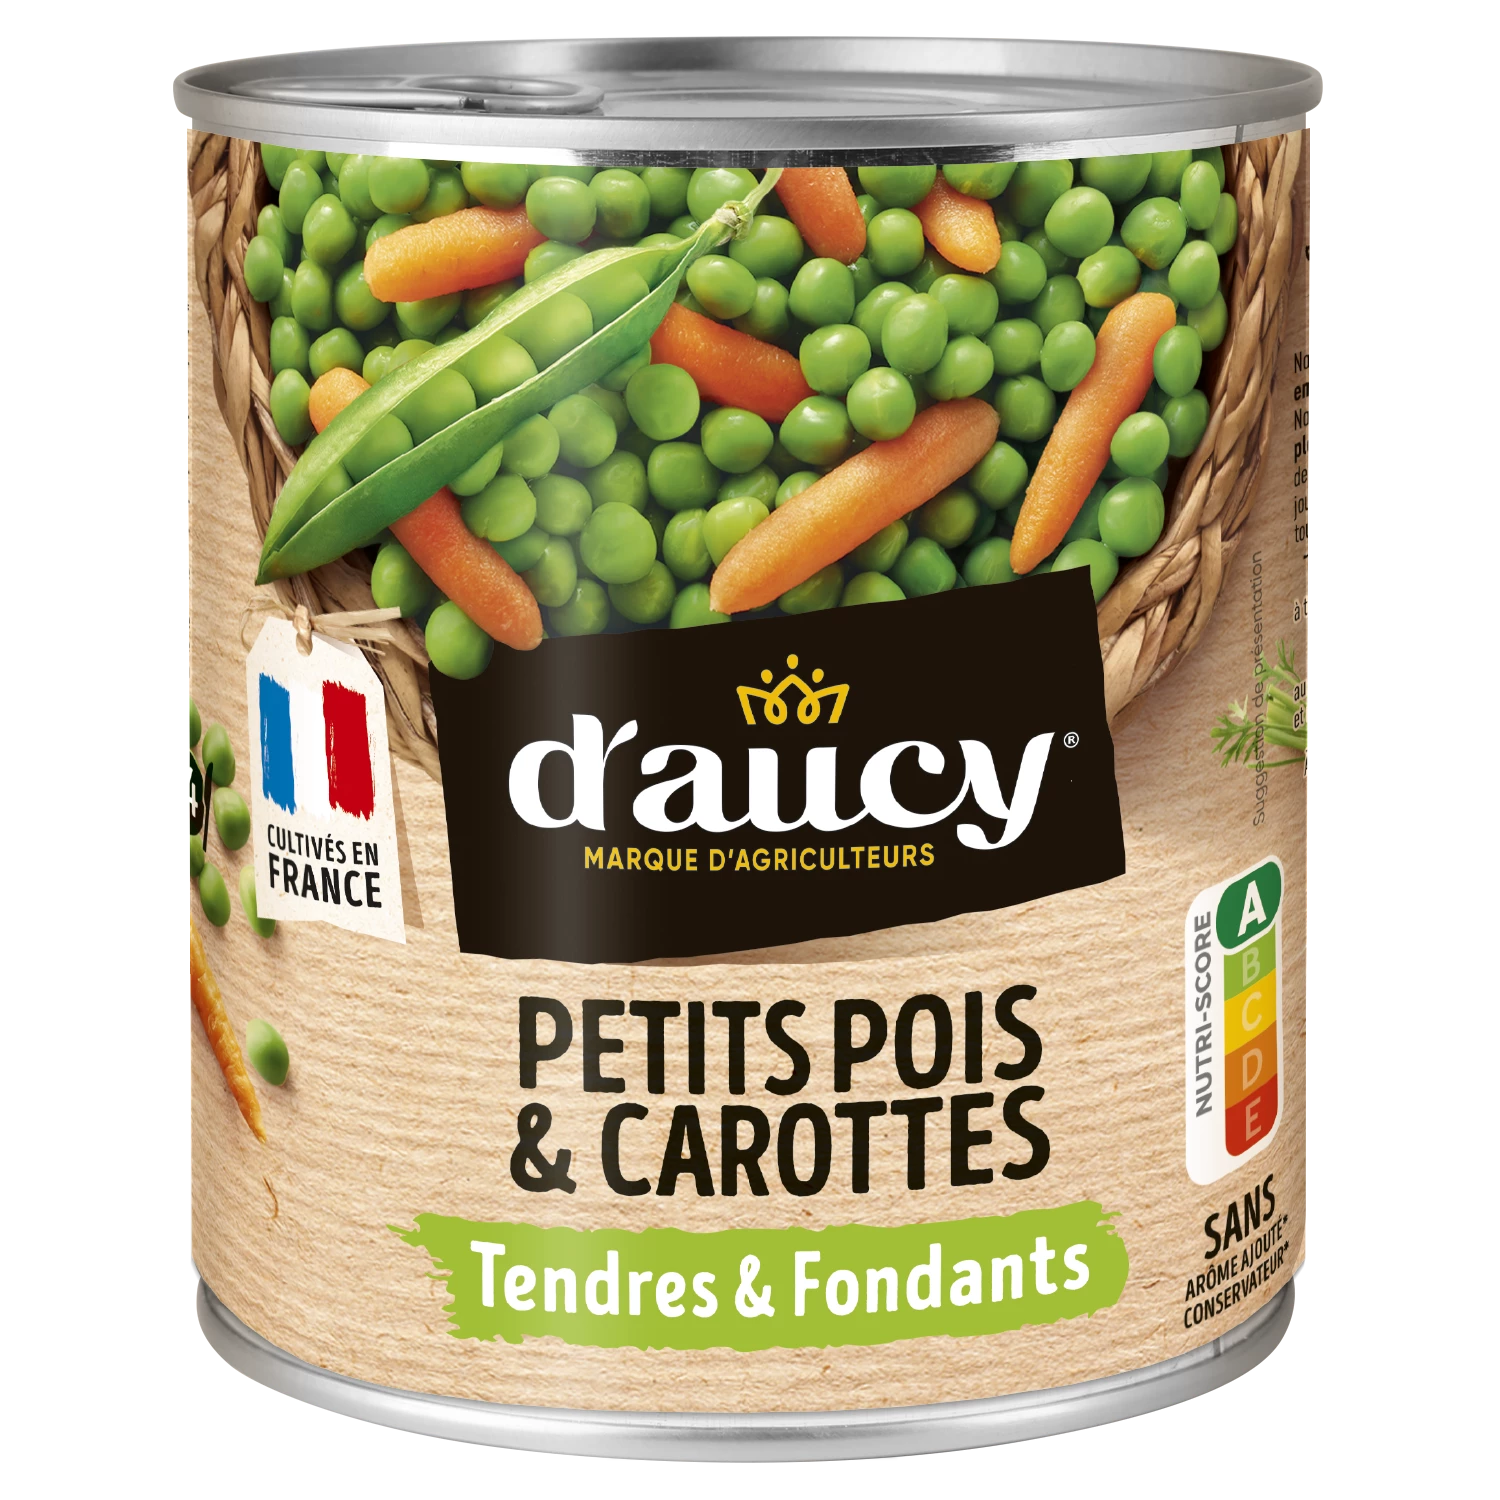 Extra Tender Peas and Carrots, 530g -  D'AUCY